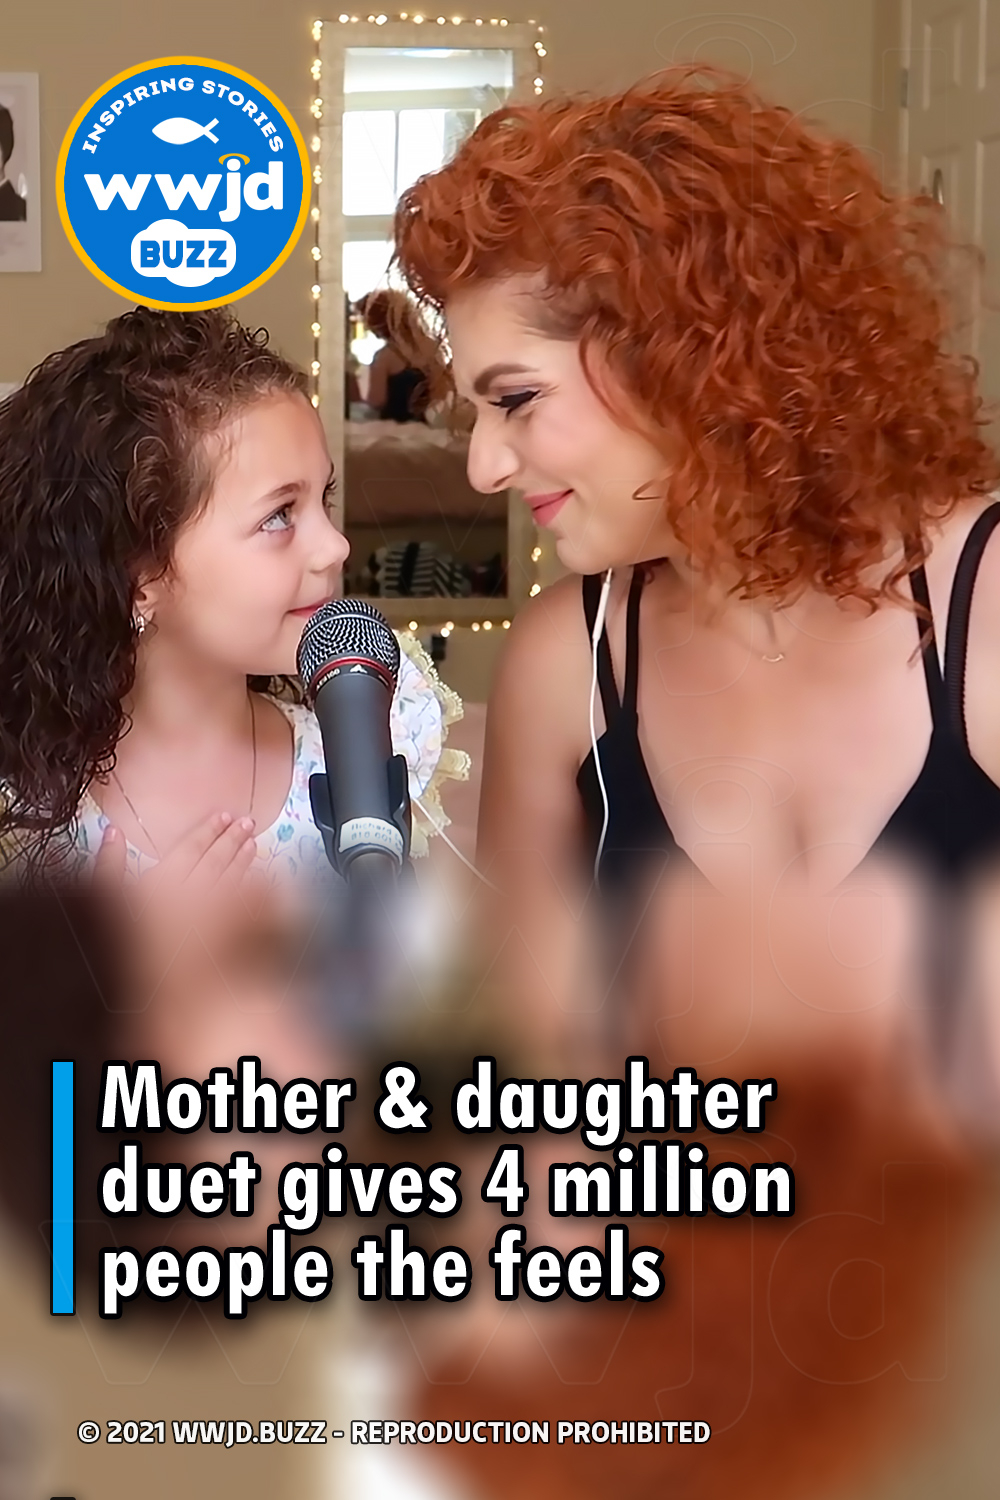 Mother & daughter duet gives 4 million people the feels